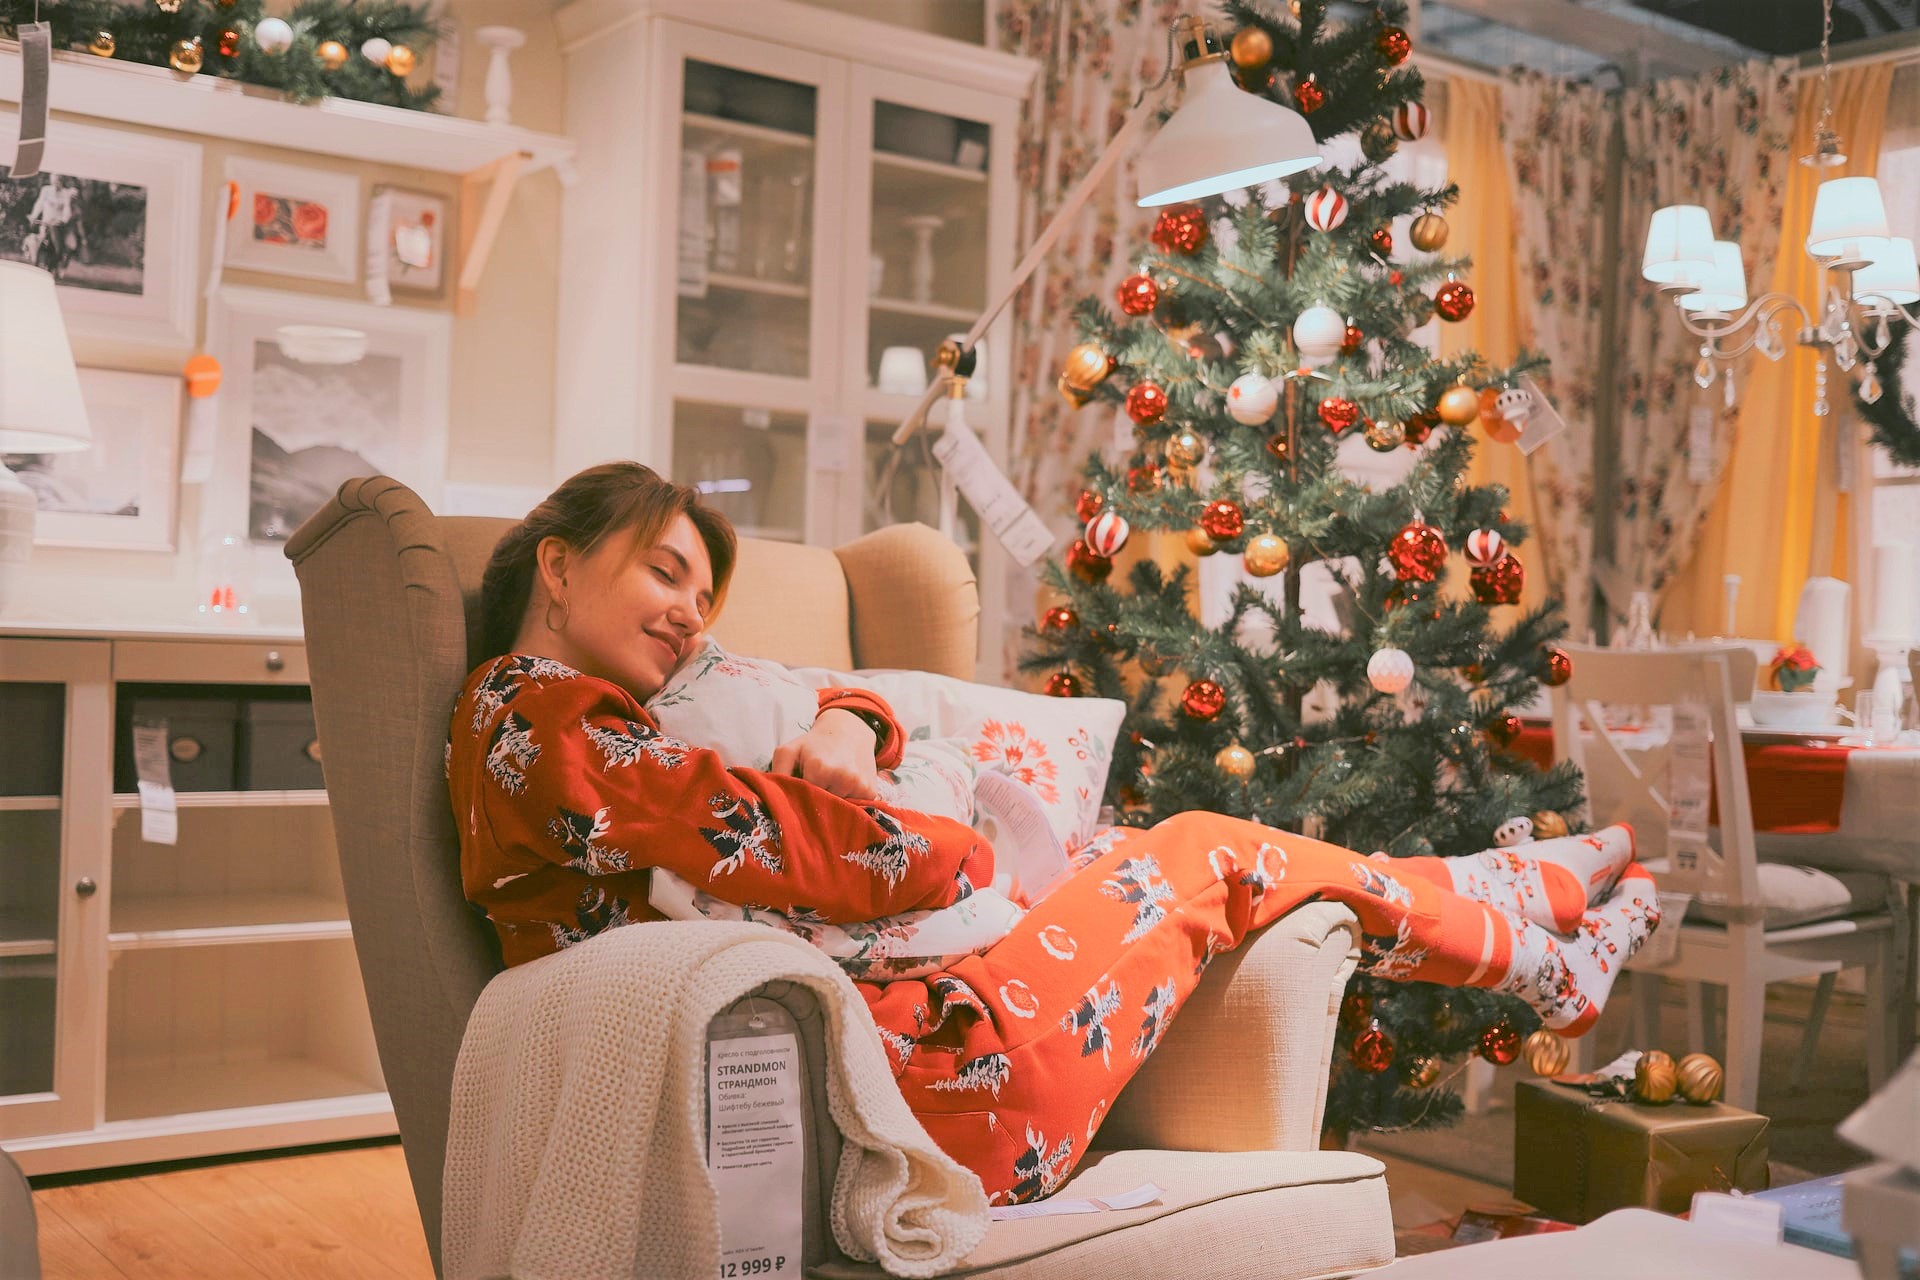 The most fashionable pajamas for the holidays!